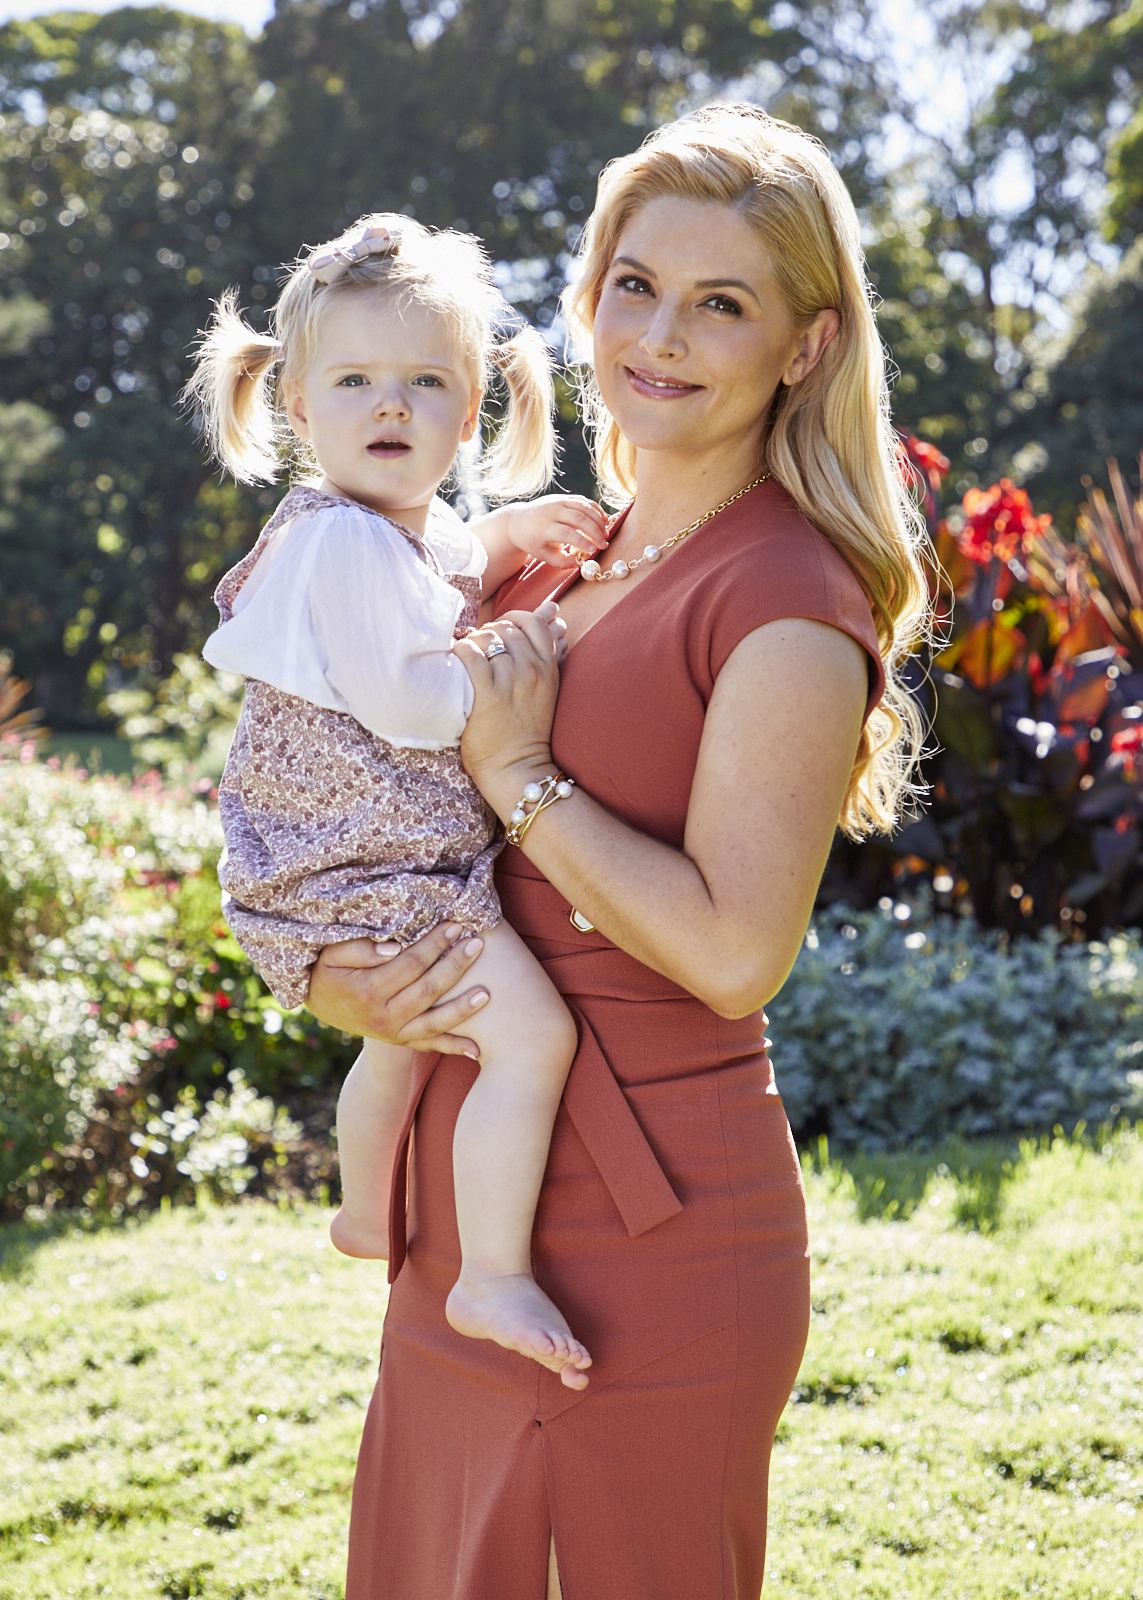 Lucy Durack Interview on Life and Motherhood